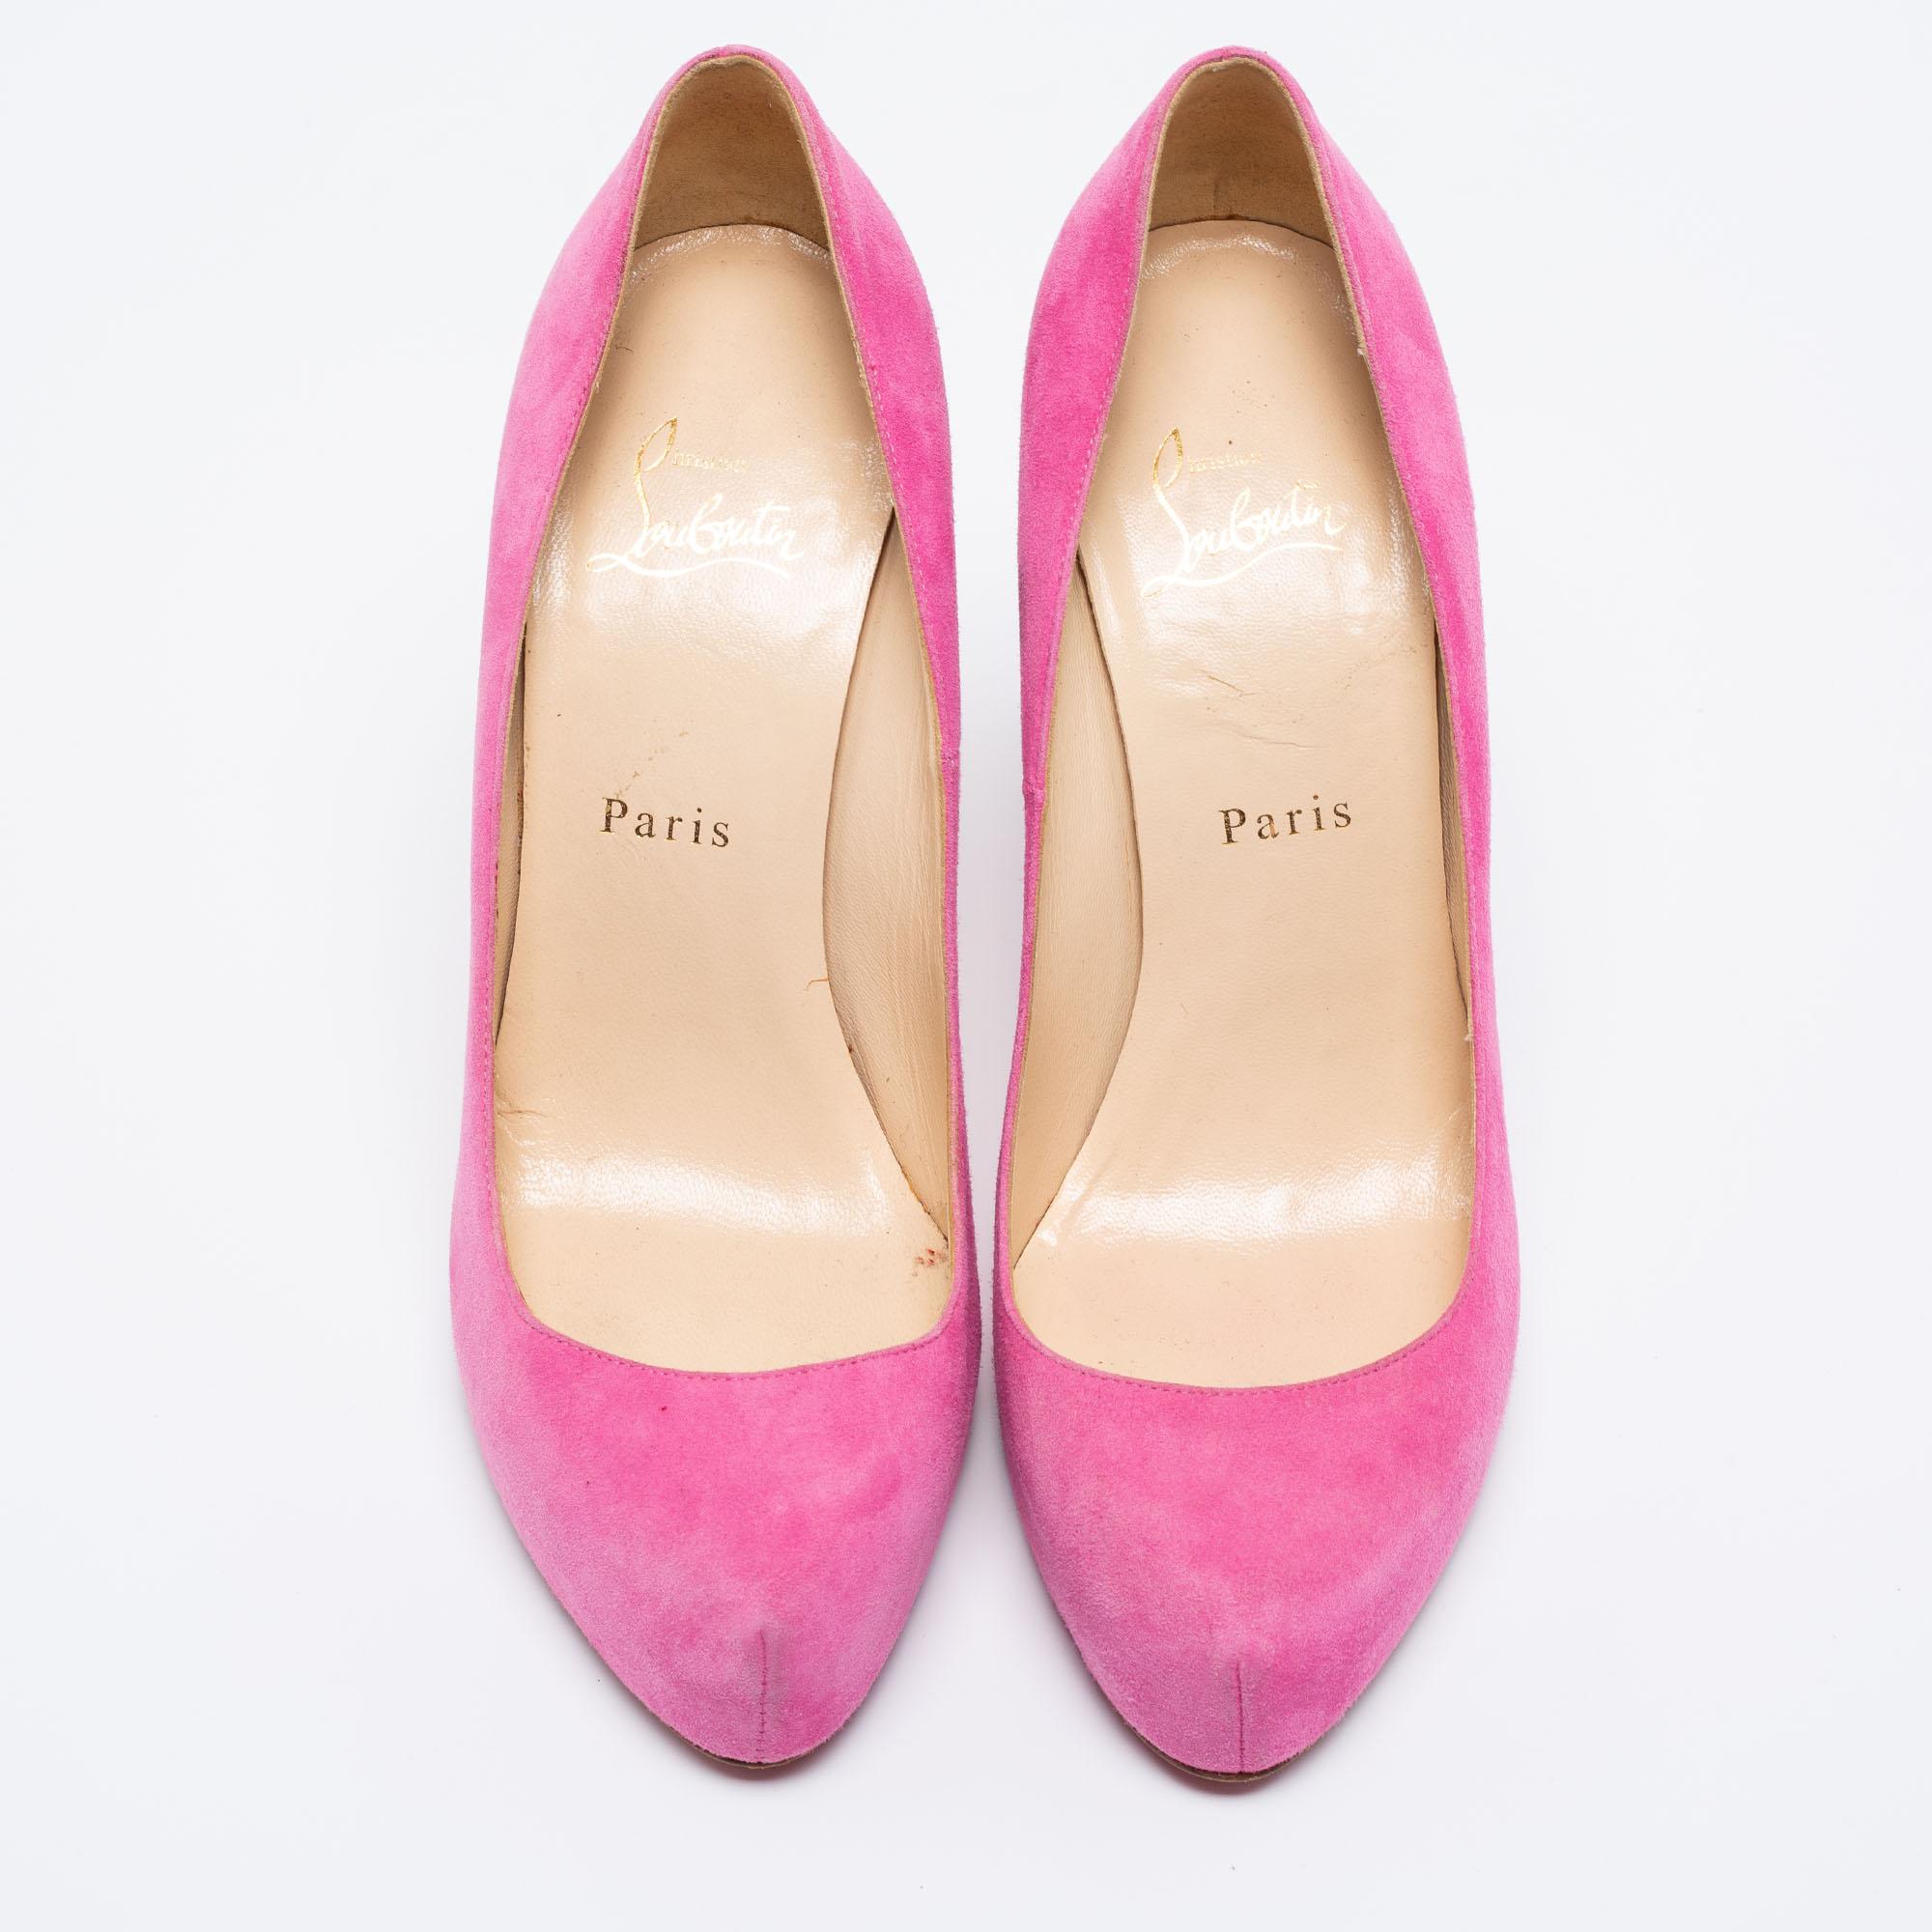 Elegant and charming, these Elisa pumps from Christian Louboutin are a dreamy creation you will love to own. They are made from pink suede and are enriched with rounded toes, slim heels, and a slip-on detail. The red-lacquered soles add a signature